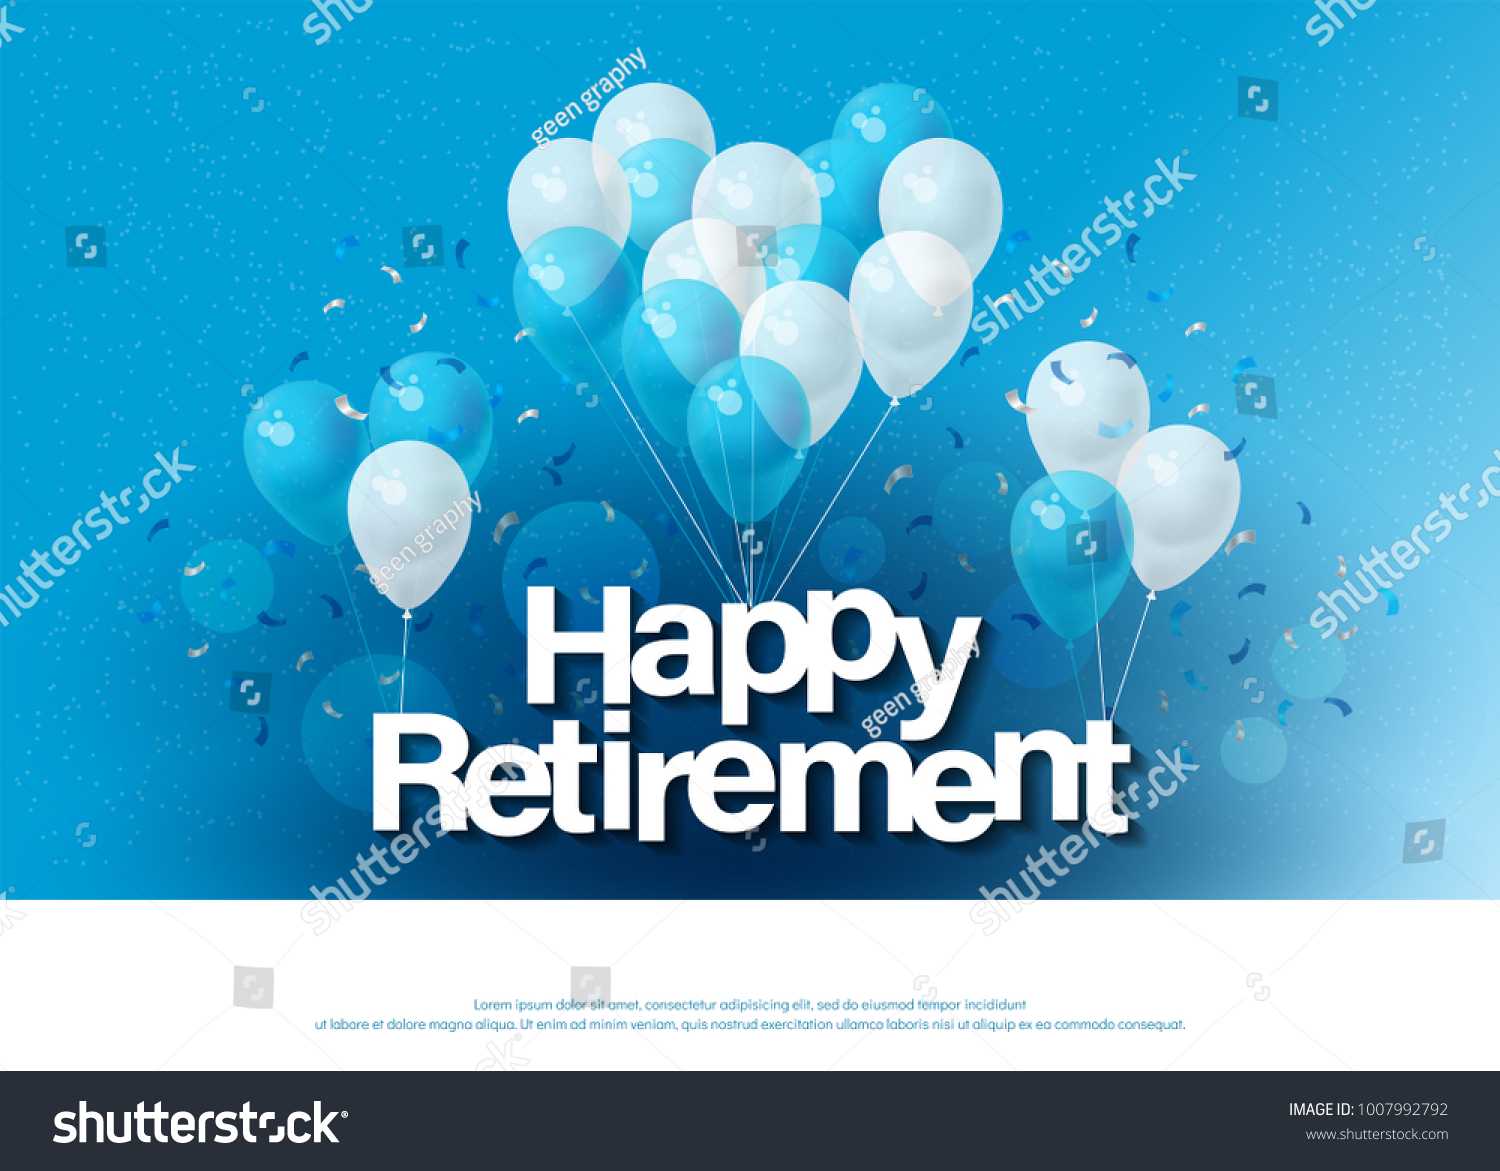 Happy Retirement Greeting Card Lettering Template Stock Throughout Retirement Card Template